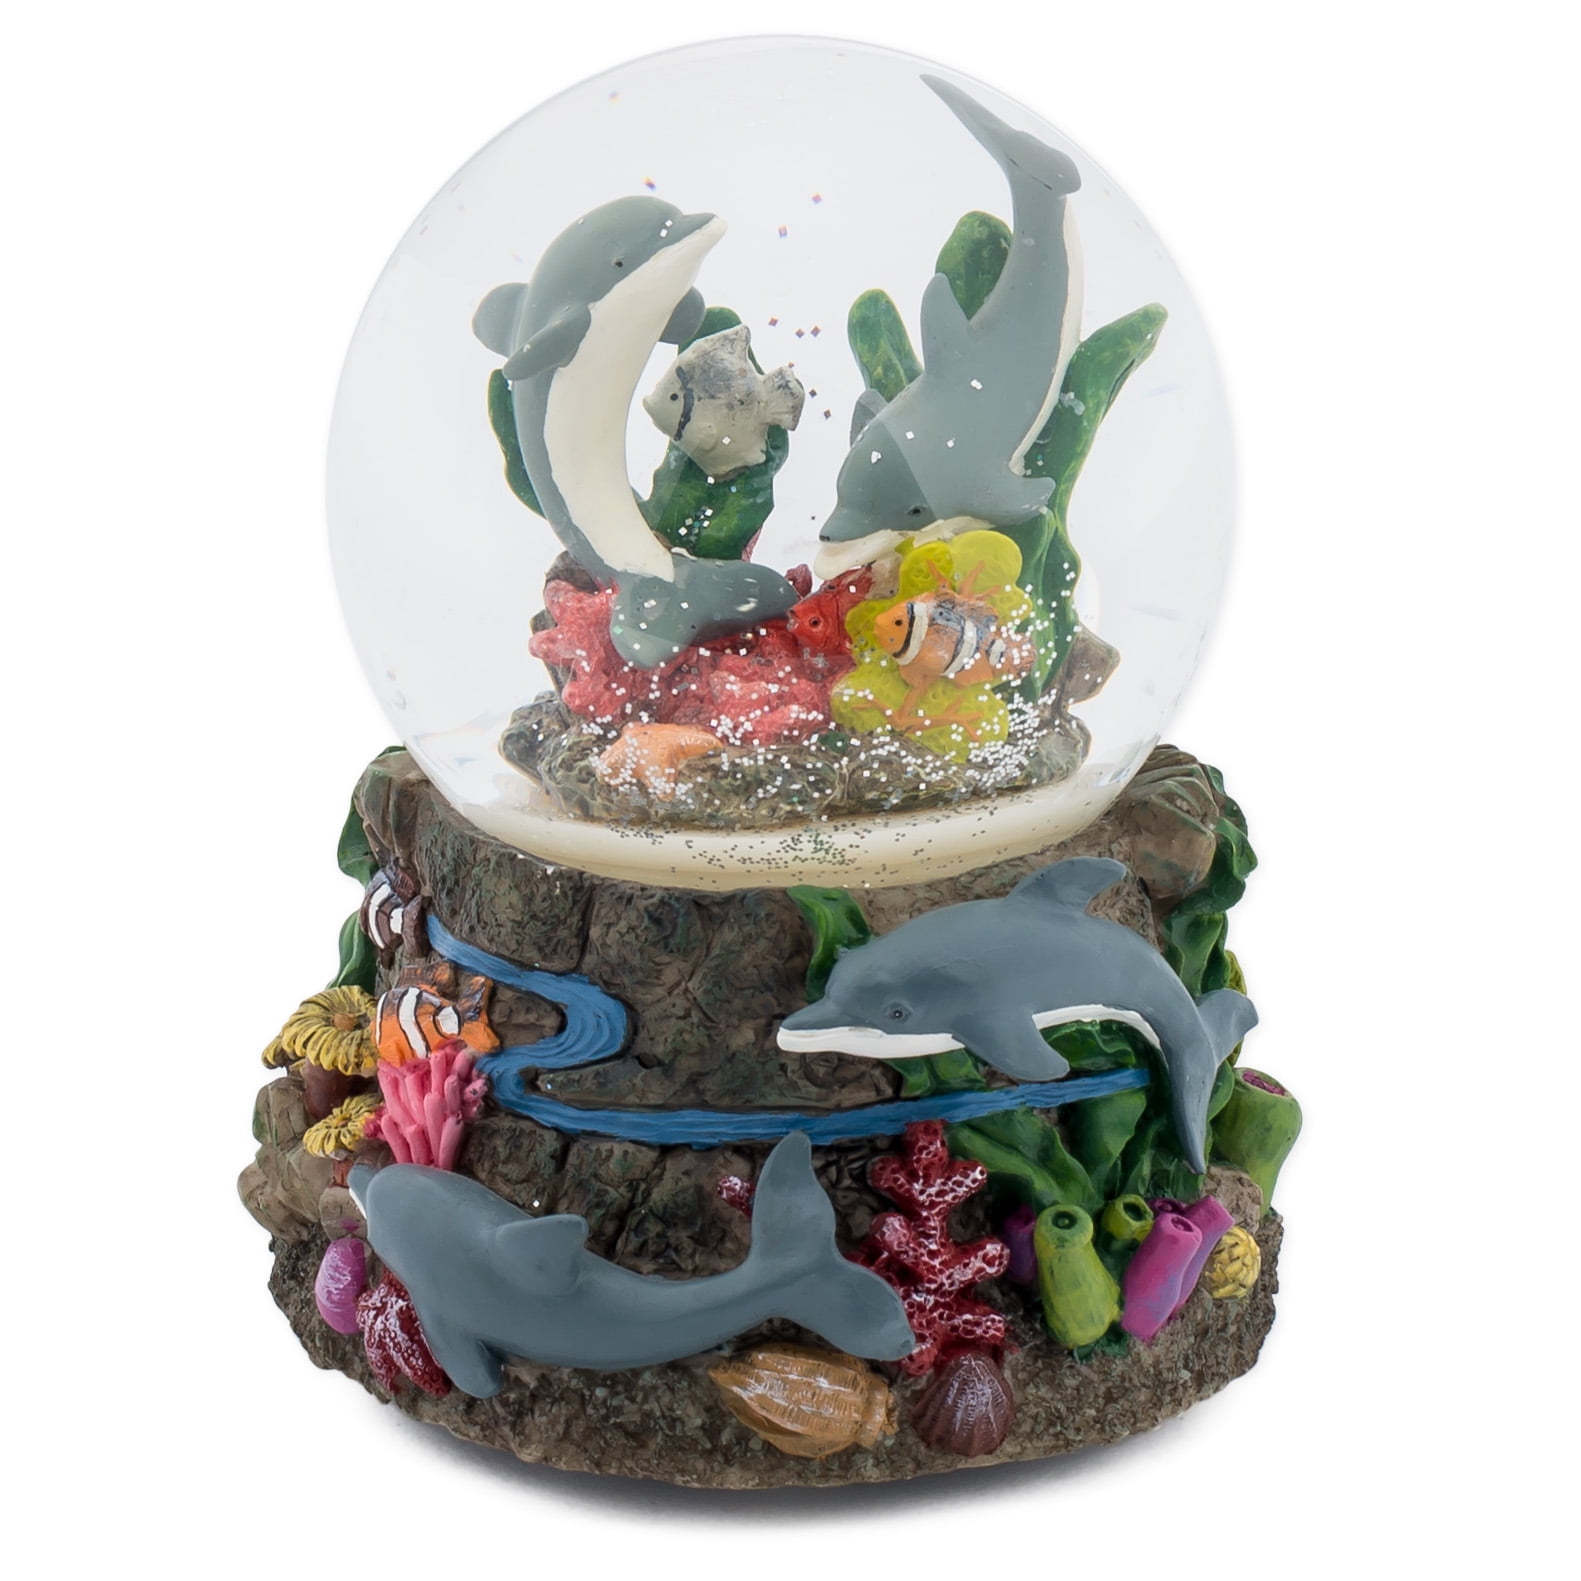 Castle Unicorn with Green Dragon 100mm Resin Glitter Water Globe Plays Tune Our Father Cadona International Inc